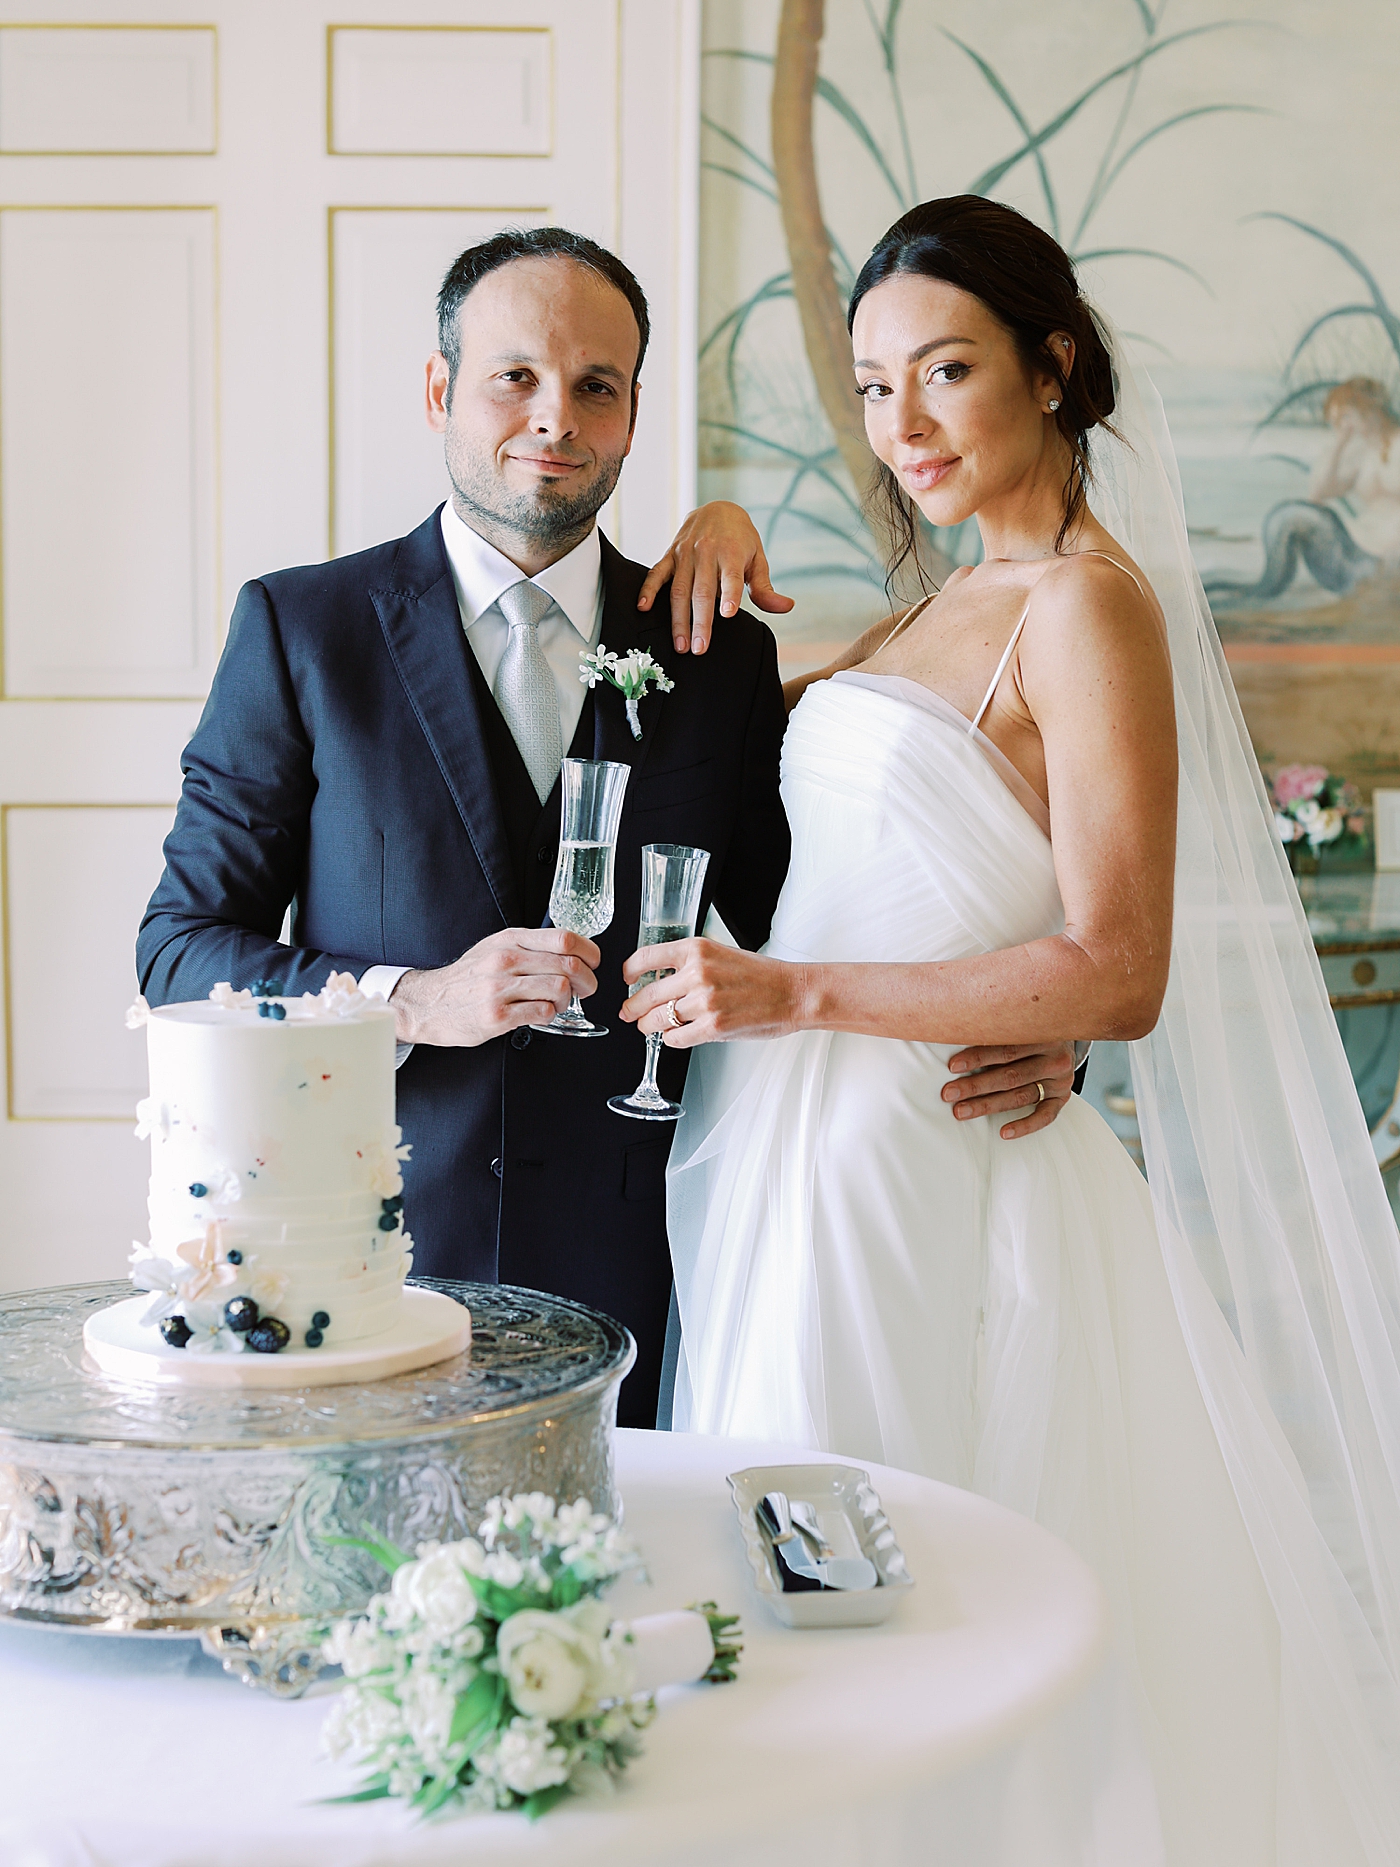 Bride and groom toasting champagne | Image by Diane Sotero Photography